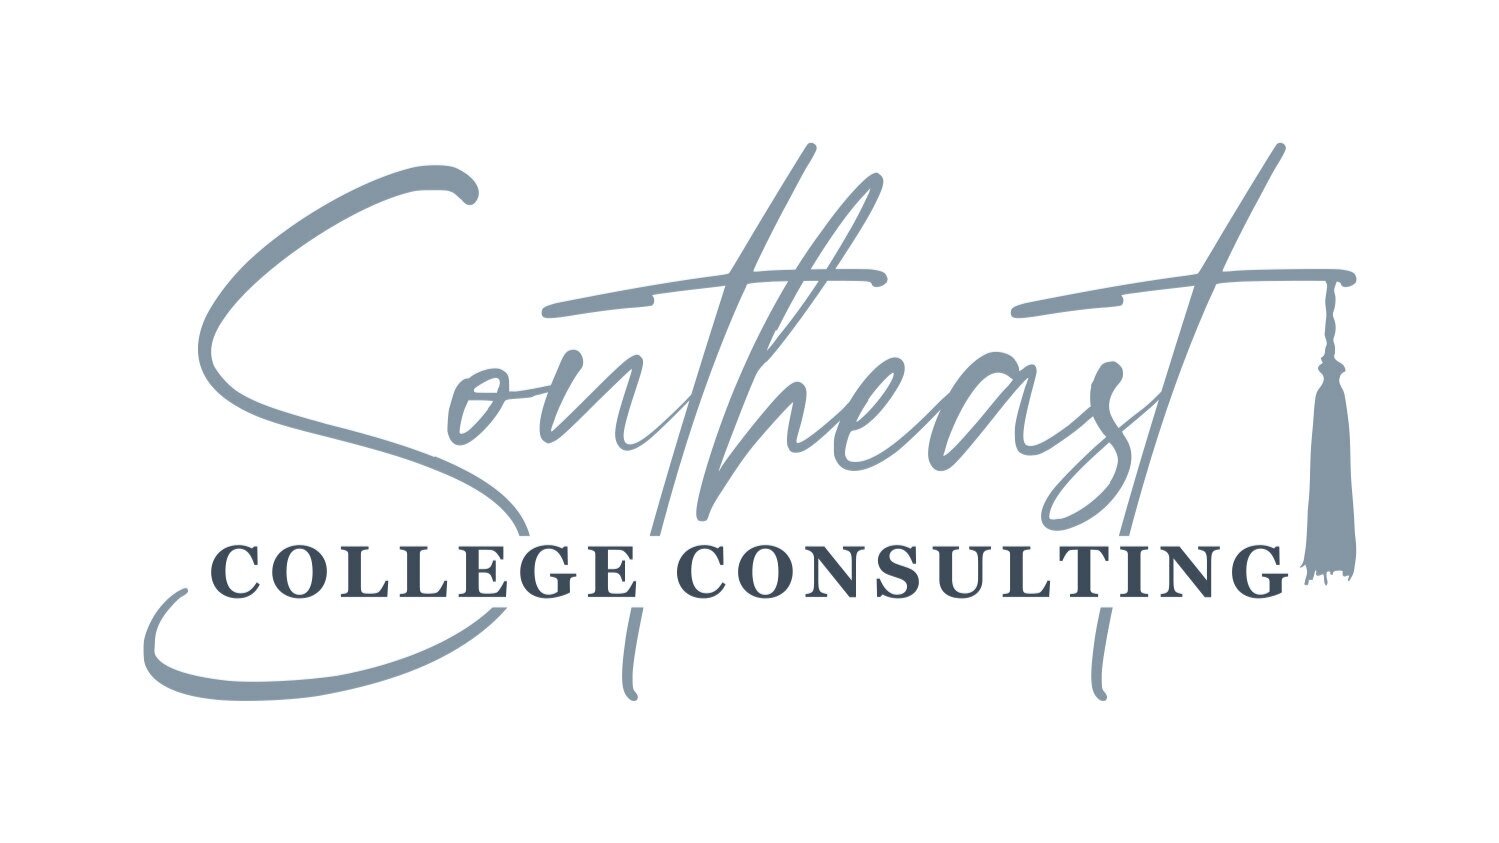 Southeast College Consulting